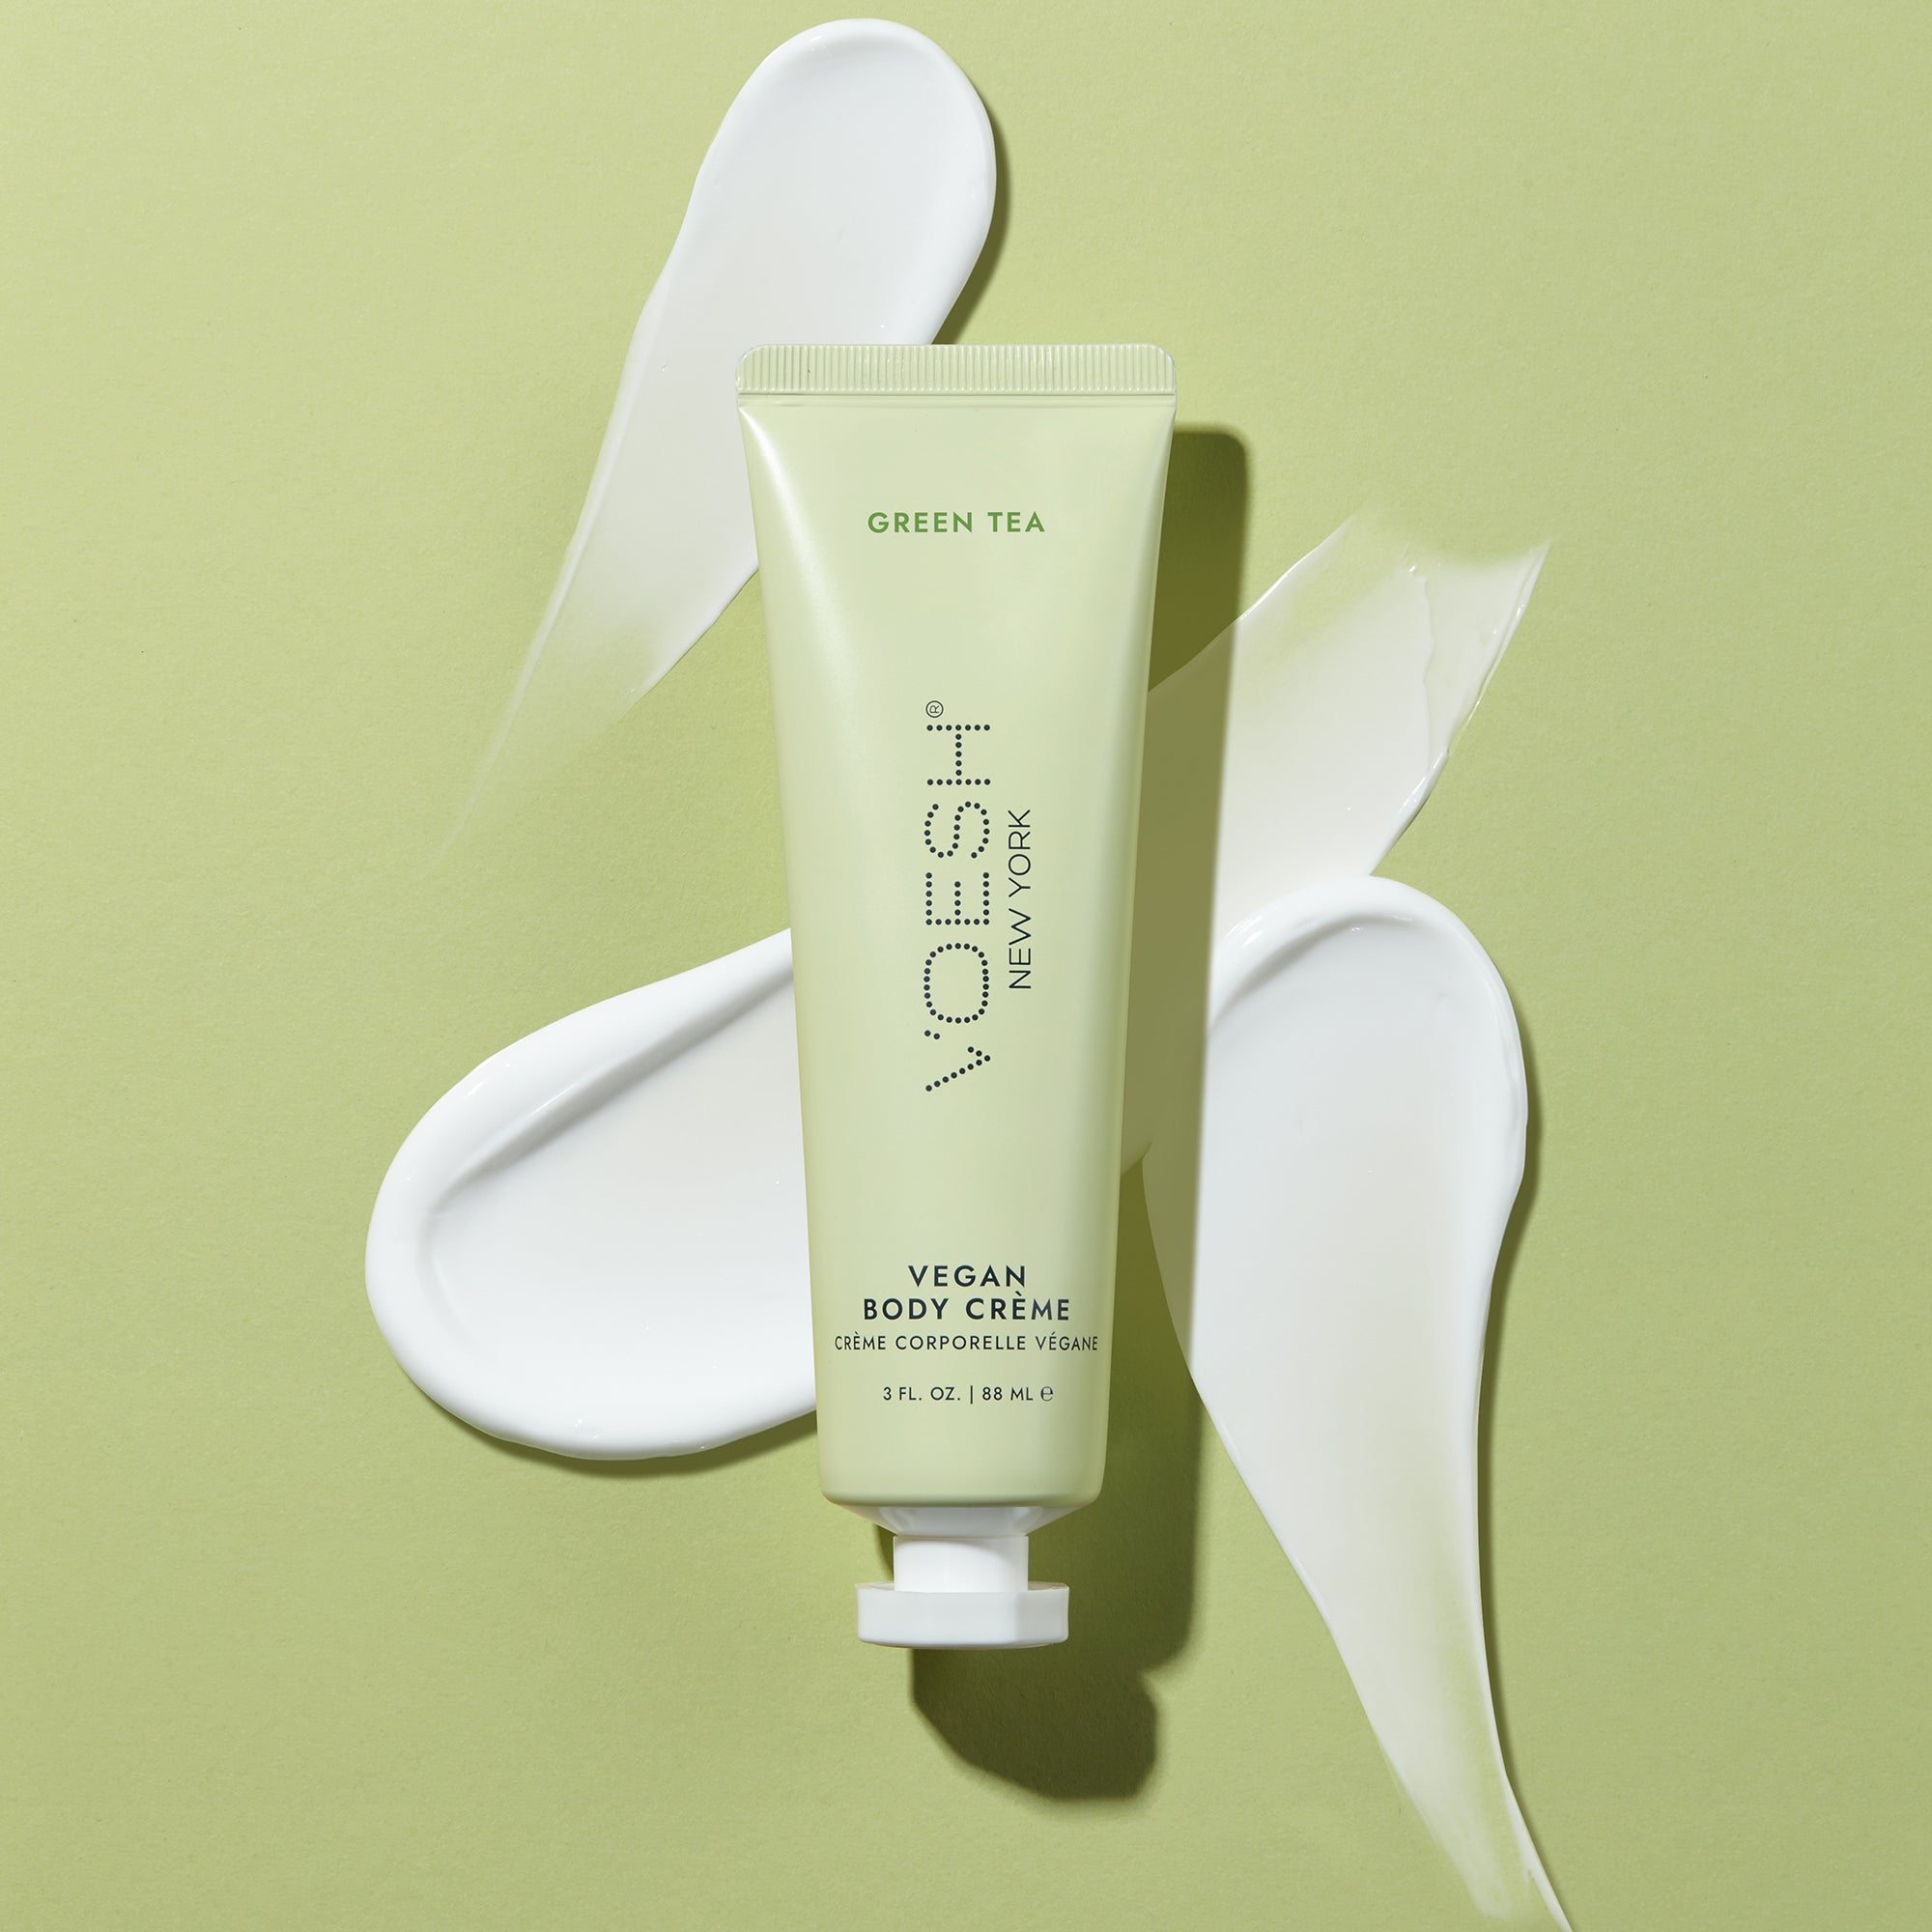 Vegan Body Crème Green Tea pictured on top of the lotion’s texture on a green background.